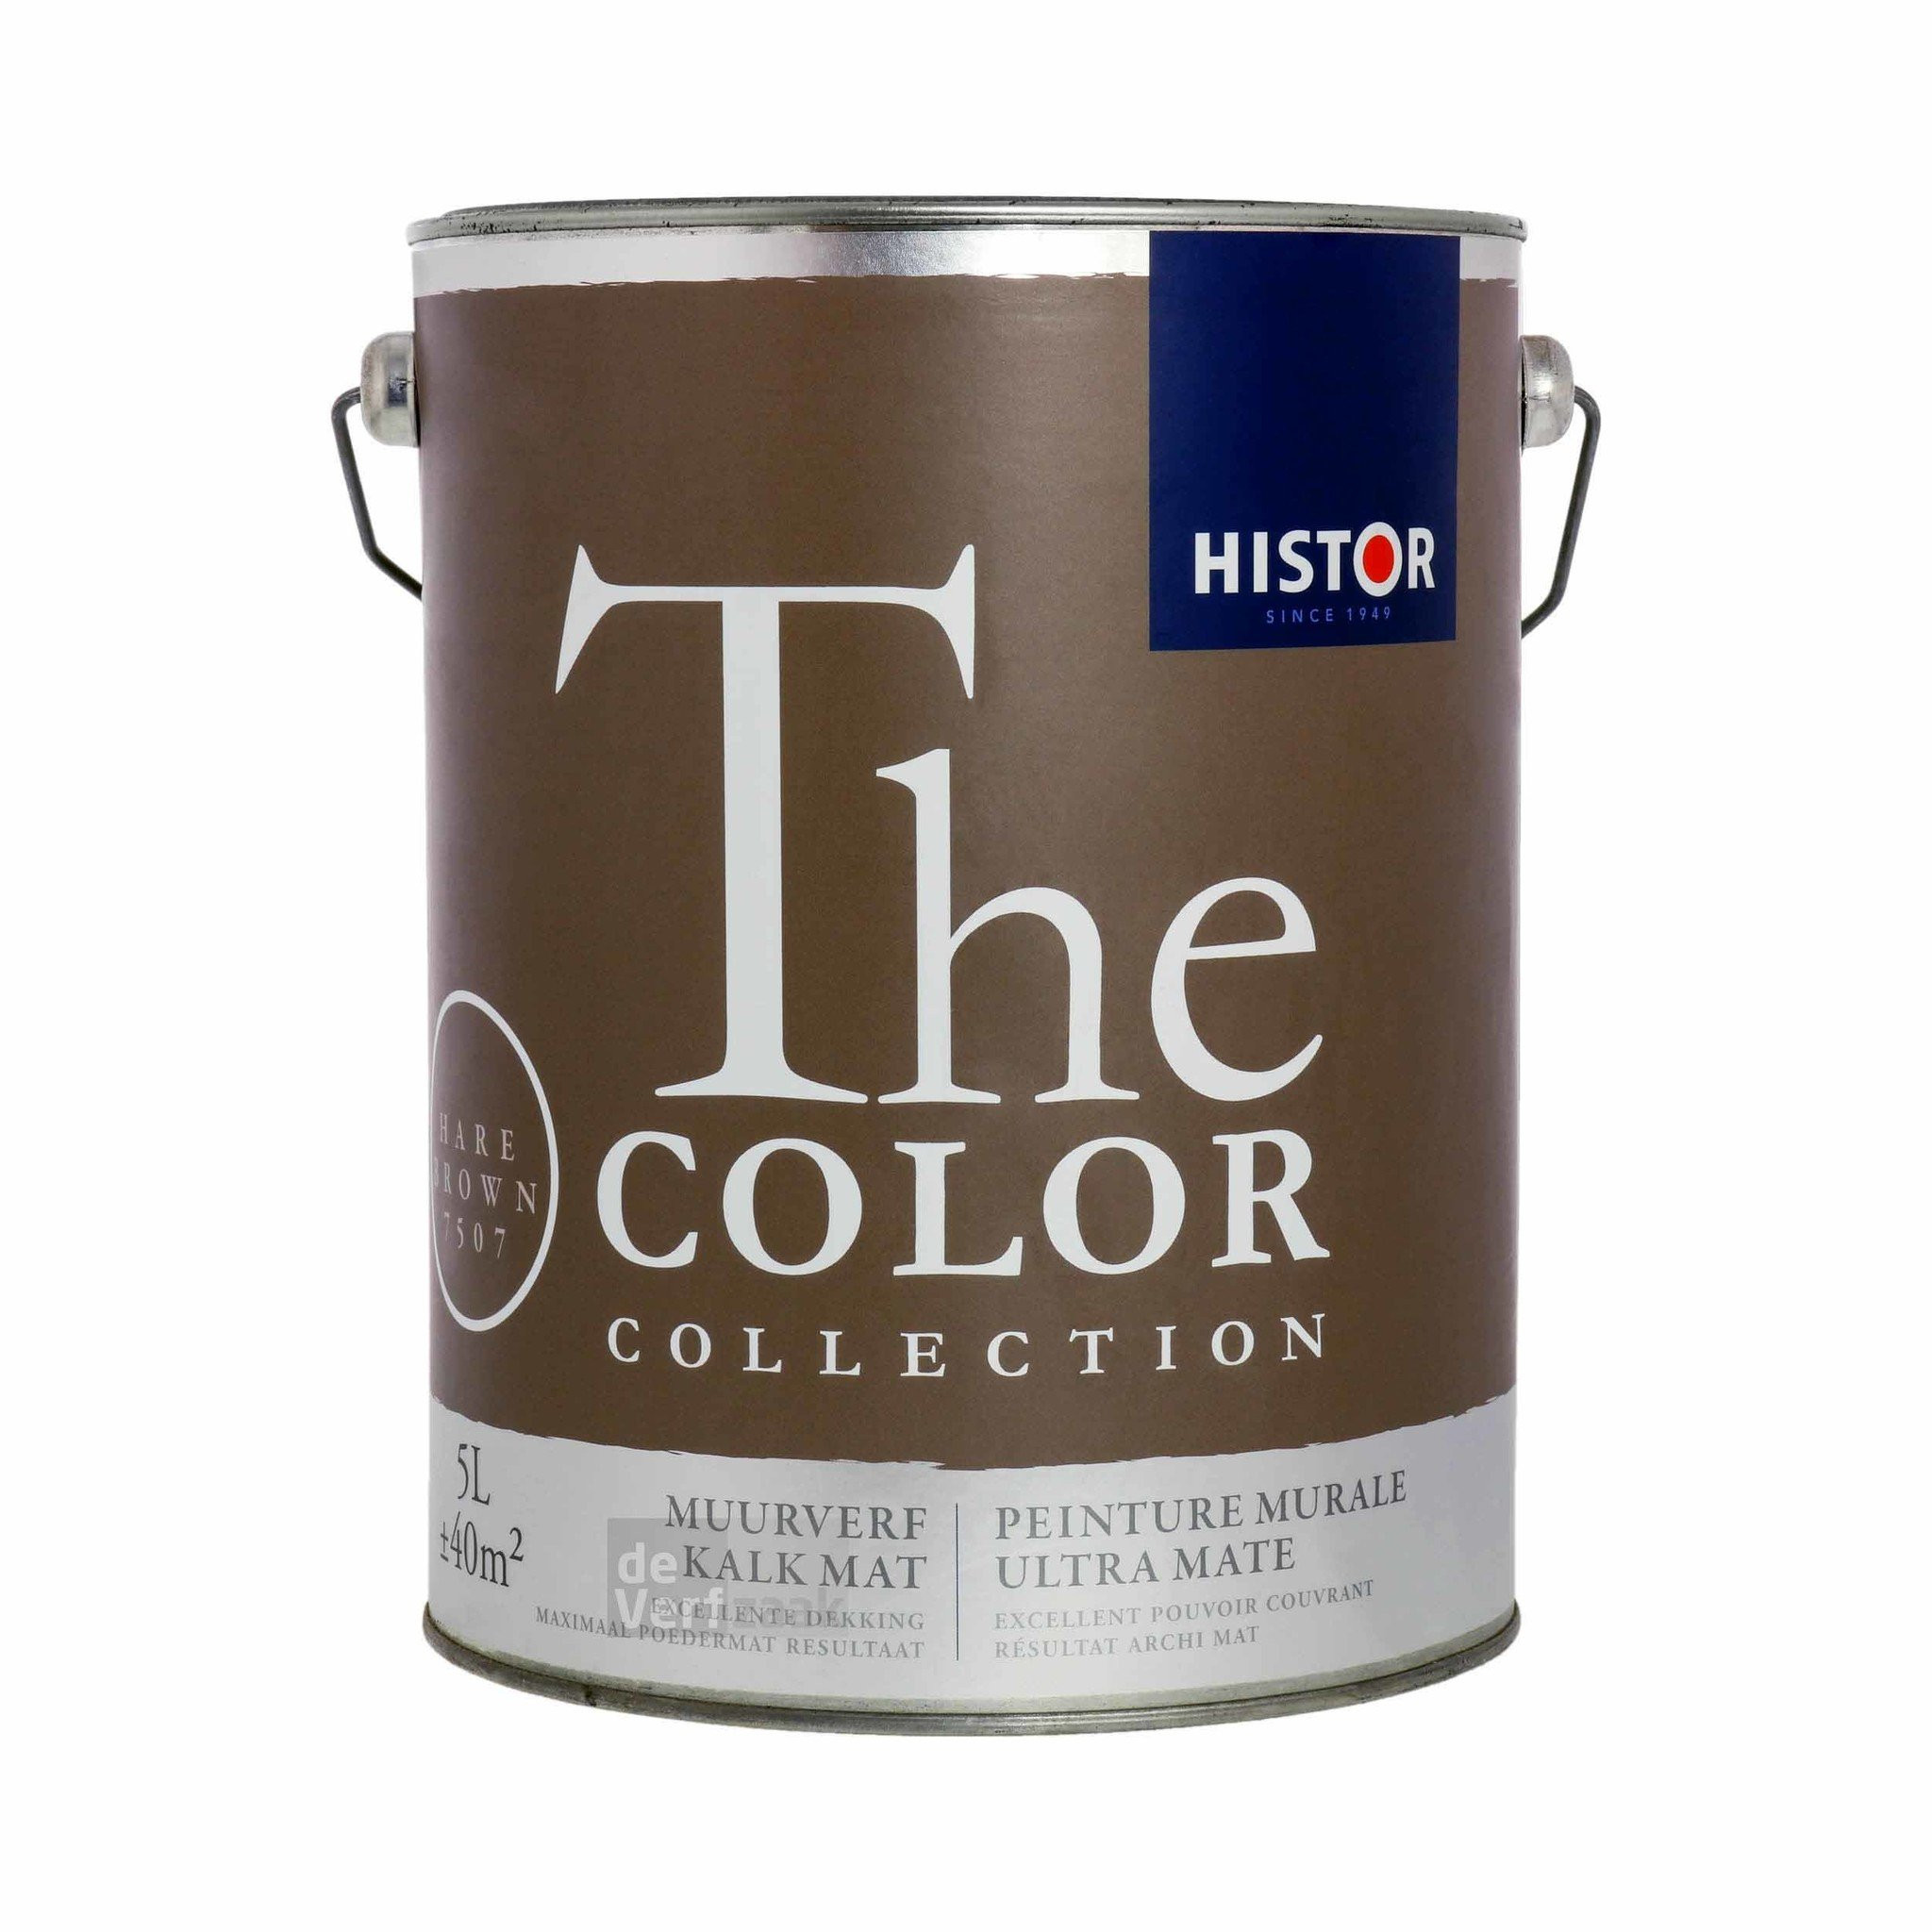 Histor The Color Collection Muurverf Kalkmat - Hare Brown - 5 liter